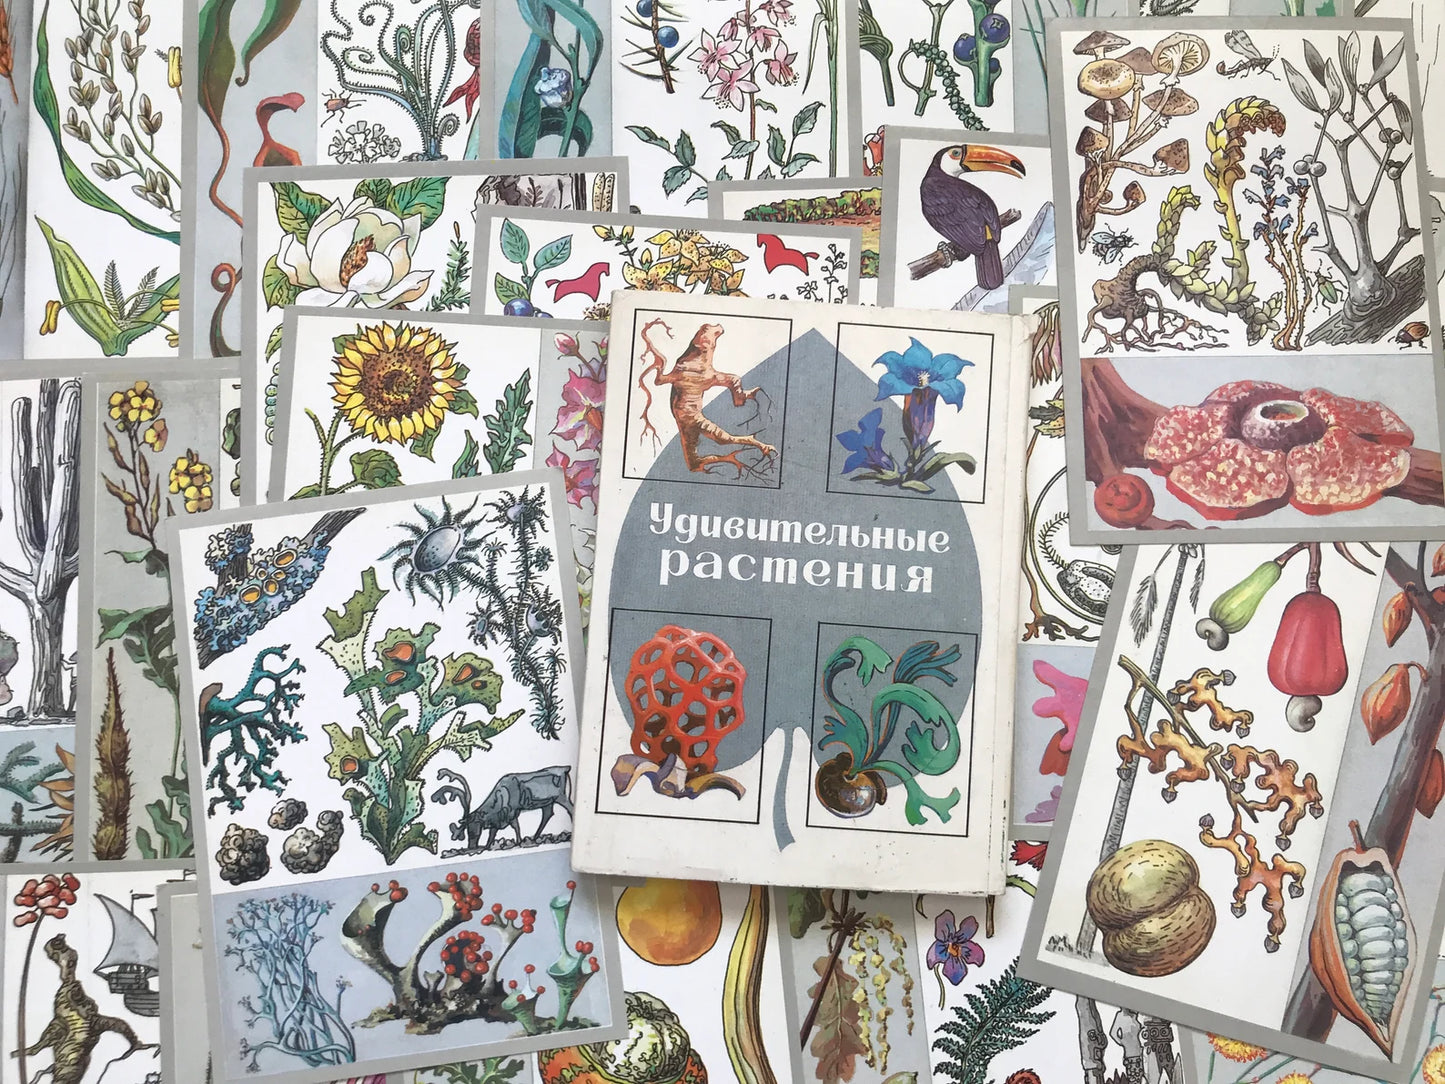 Set of 32 Vintage USSR collectible cards - Biology Cards - Amazing Plants - 1989 - unused